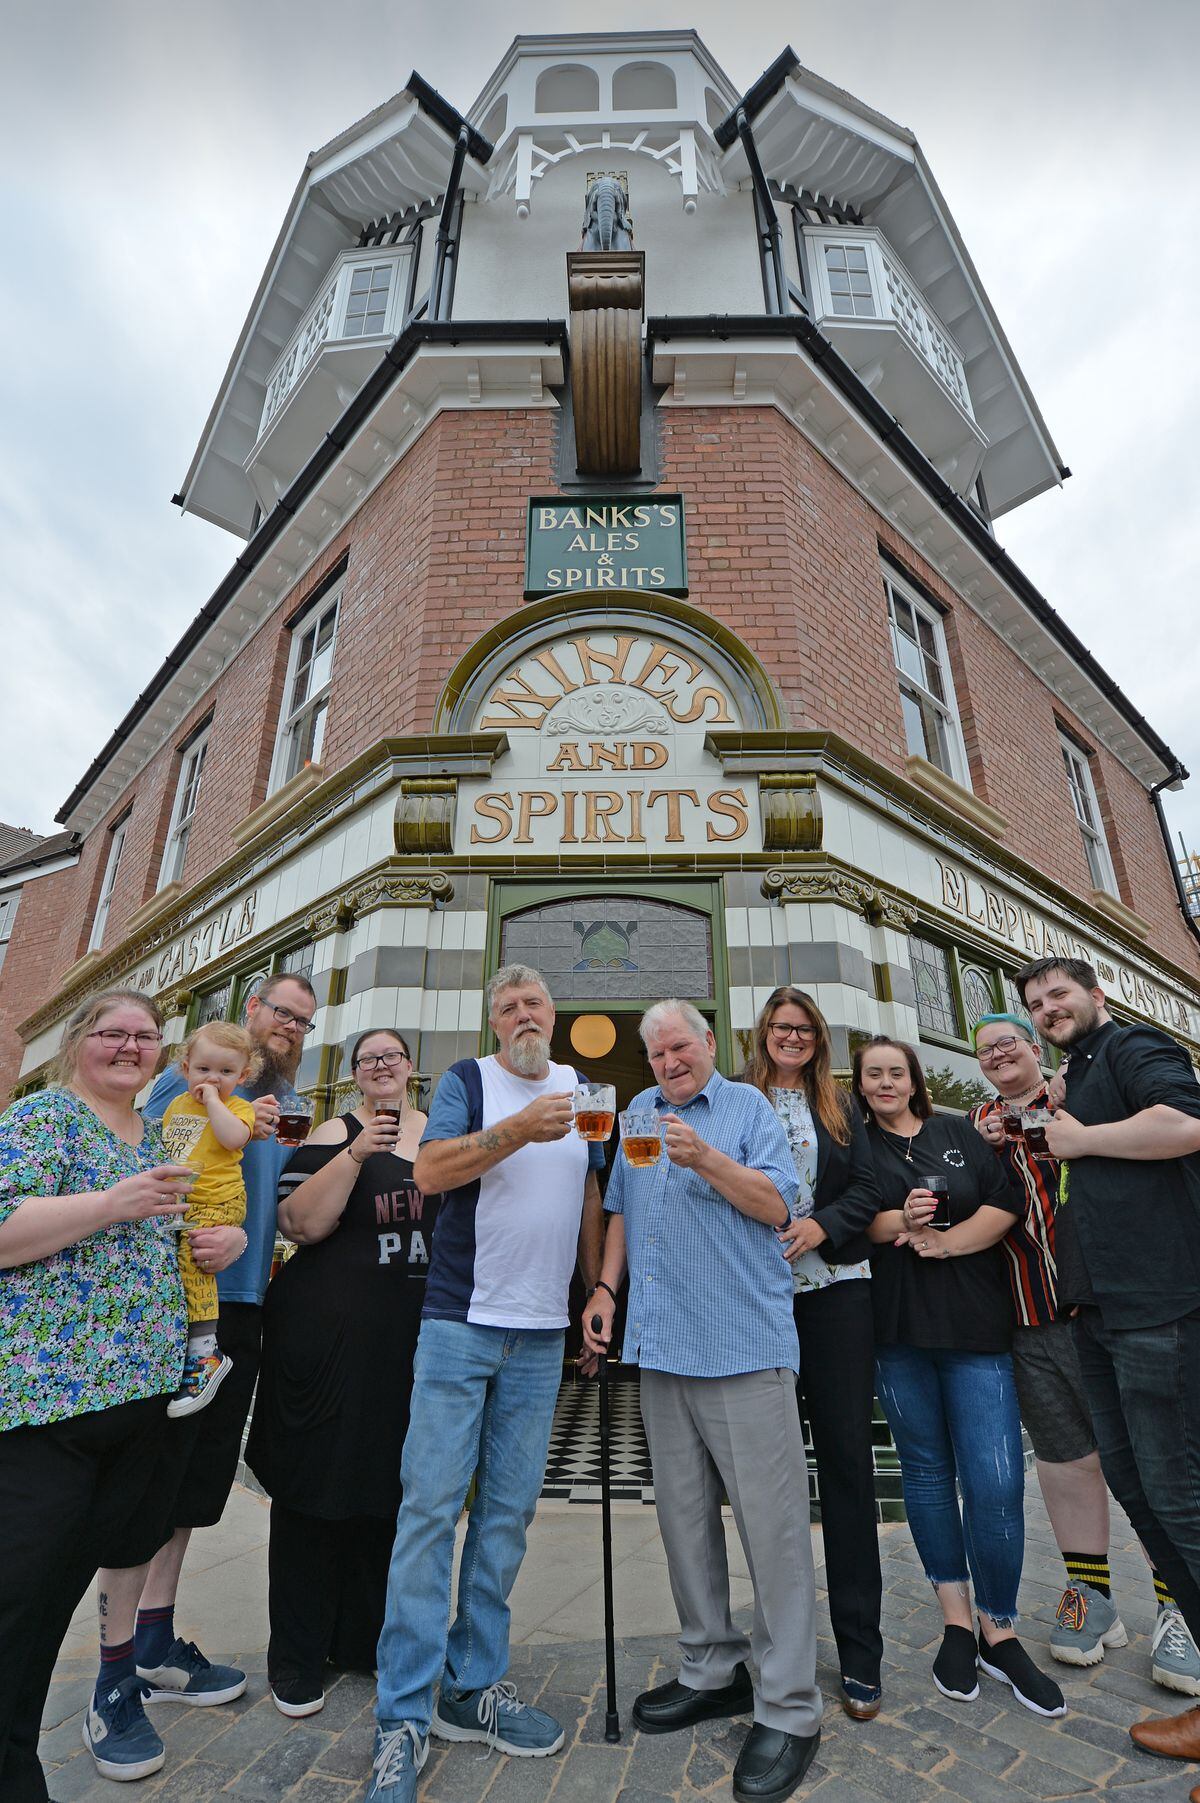 Toasting the good fortune of the pub are (front centre left), Roy Mincher and his family who used to live in the pub in the 1970's and (front right) former landlord 1978-79 John Purchase